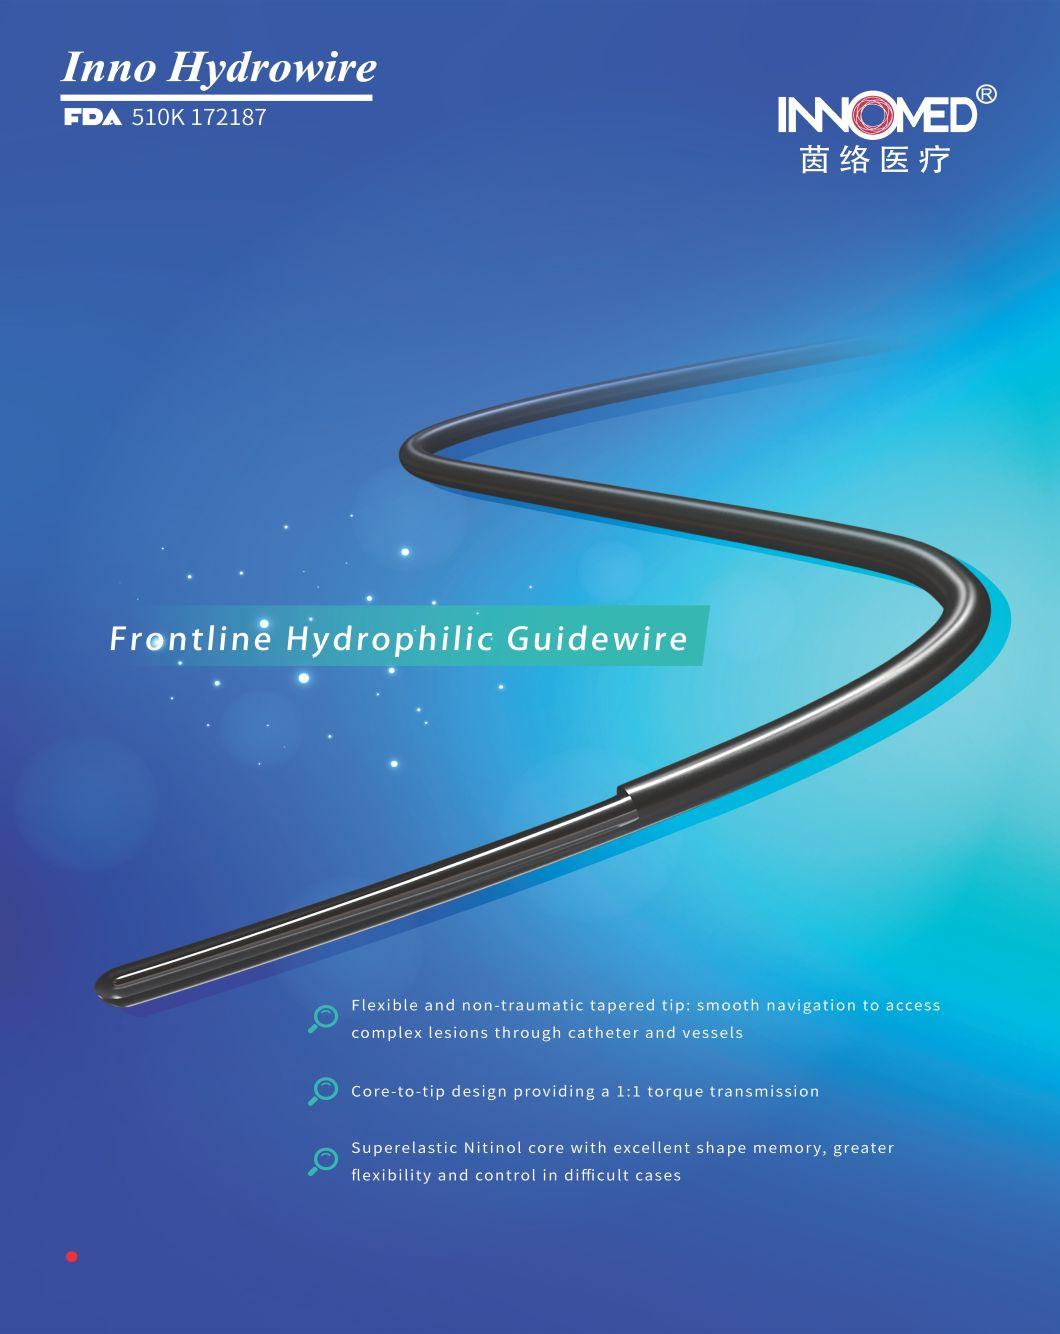 Used in The Most Popular Disposable Guide Wire in Angiography